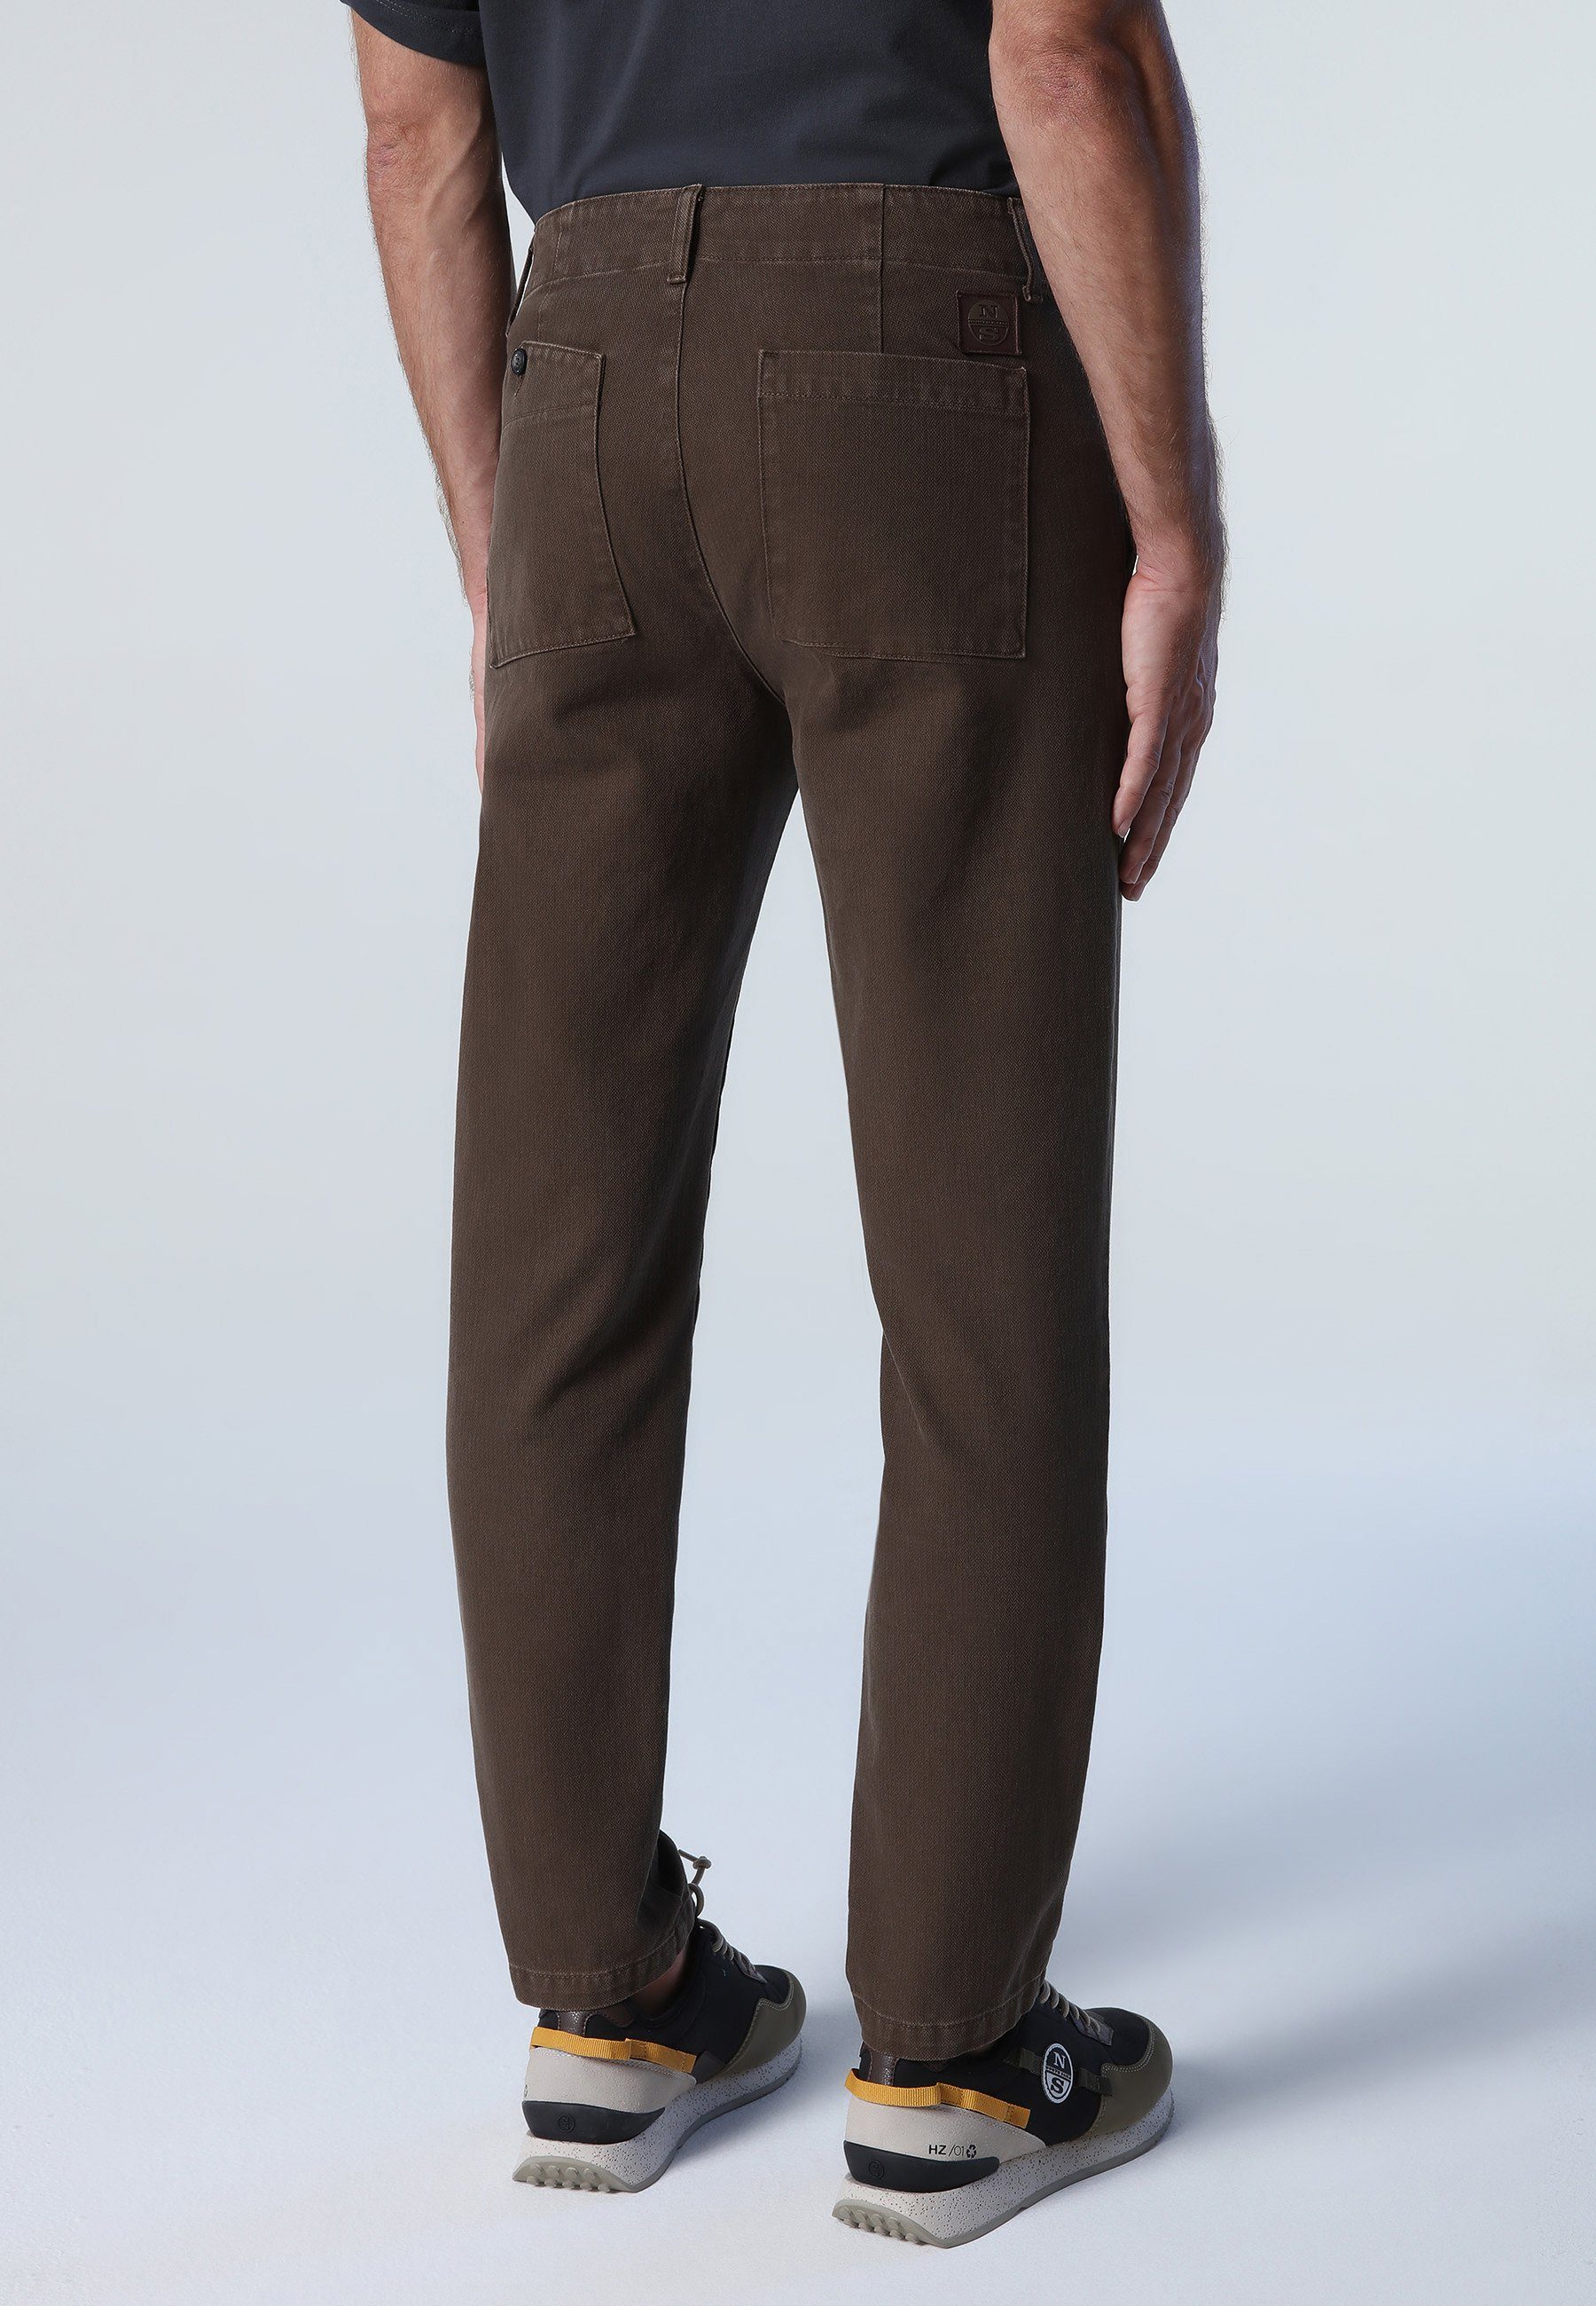 North Sails Cargohose Cargohose Recycled cotton COCOA trousers